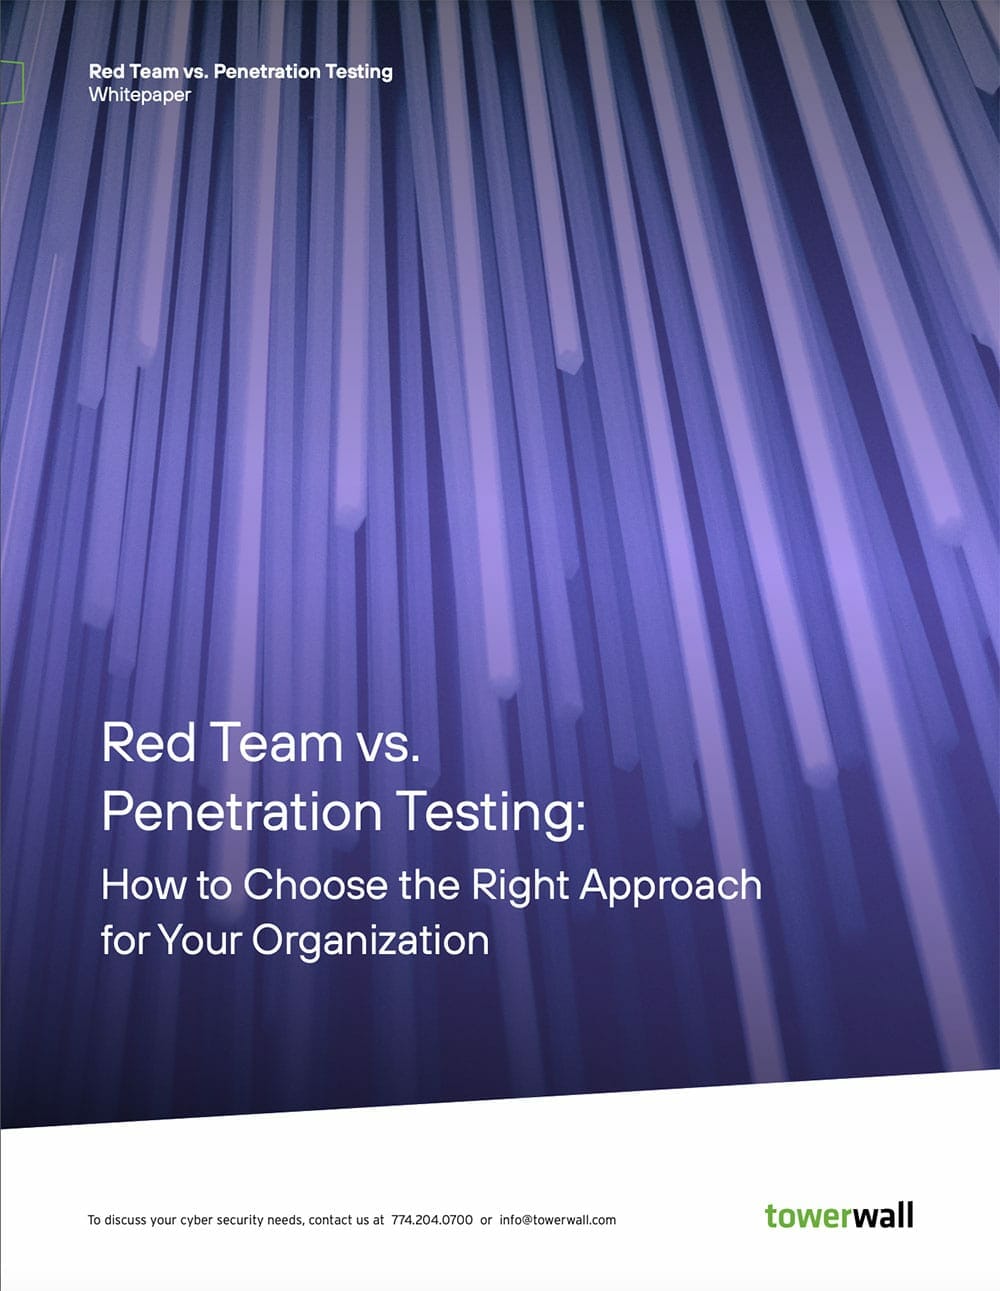 Red Team vs. Penetration Testing How to Choose the Right Approach for Your Organization thumb